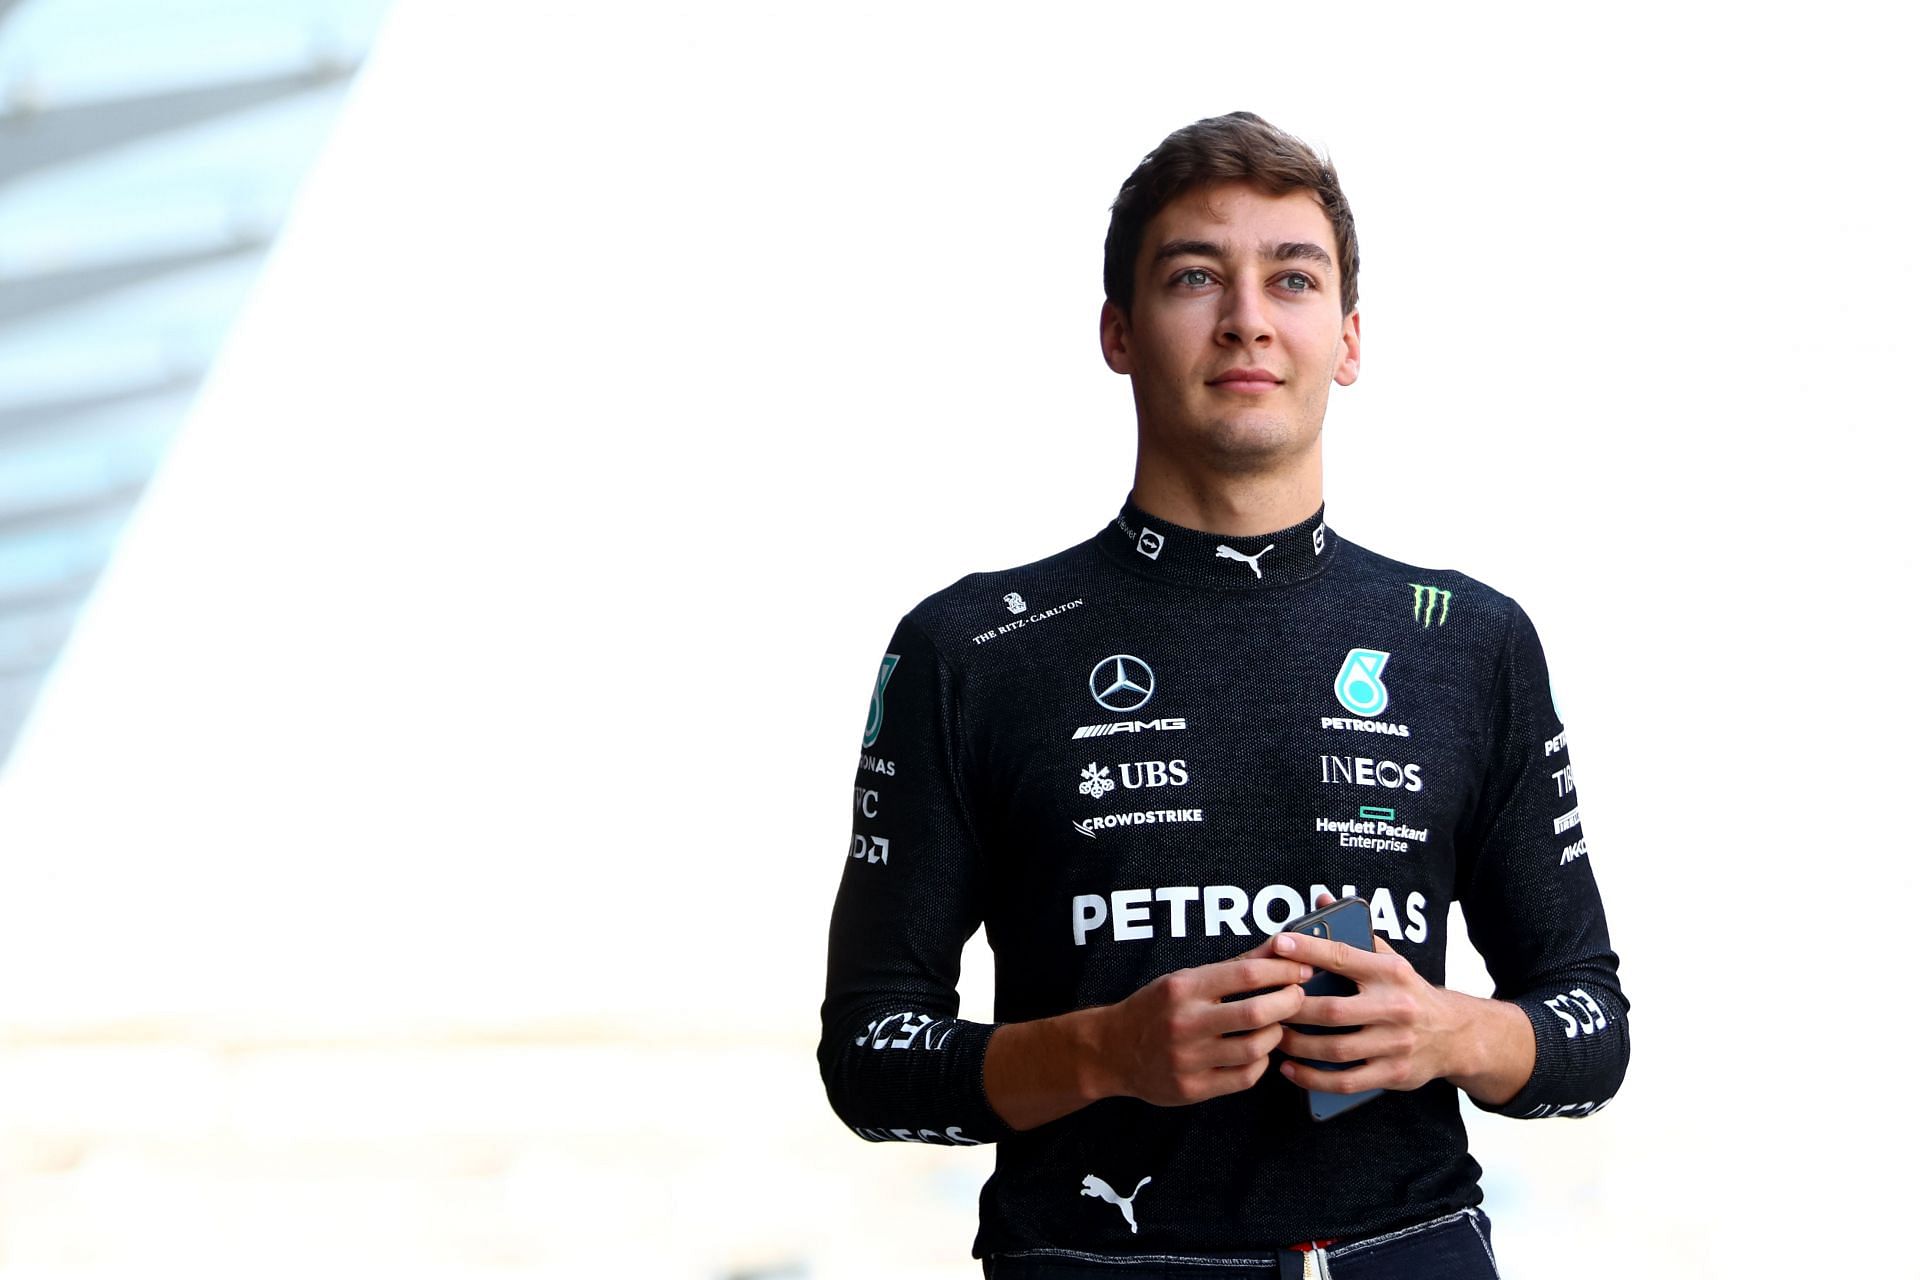 It's been the best season of my career' – Russell insists he and Mercedes  still have 'a lot of positives' to take from 2022